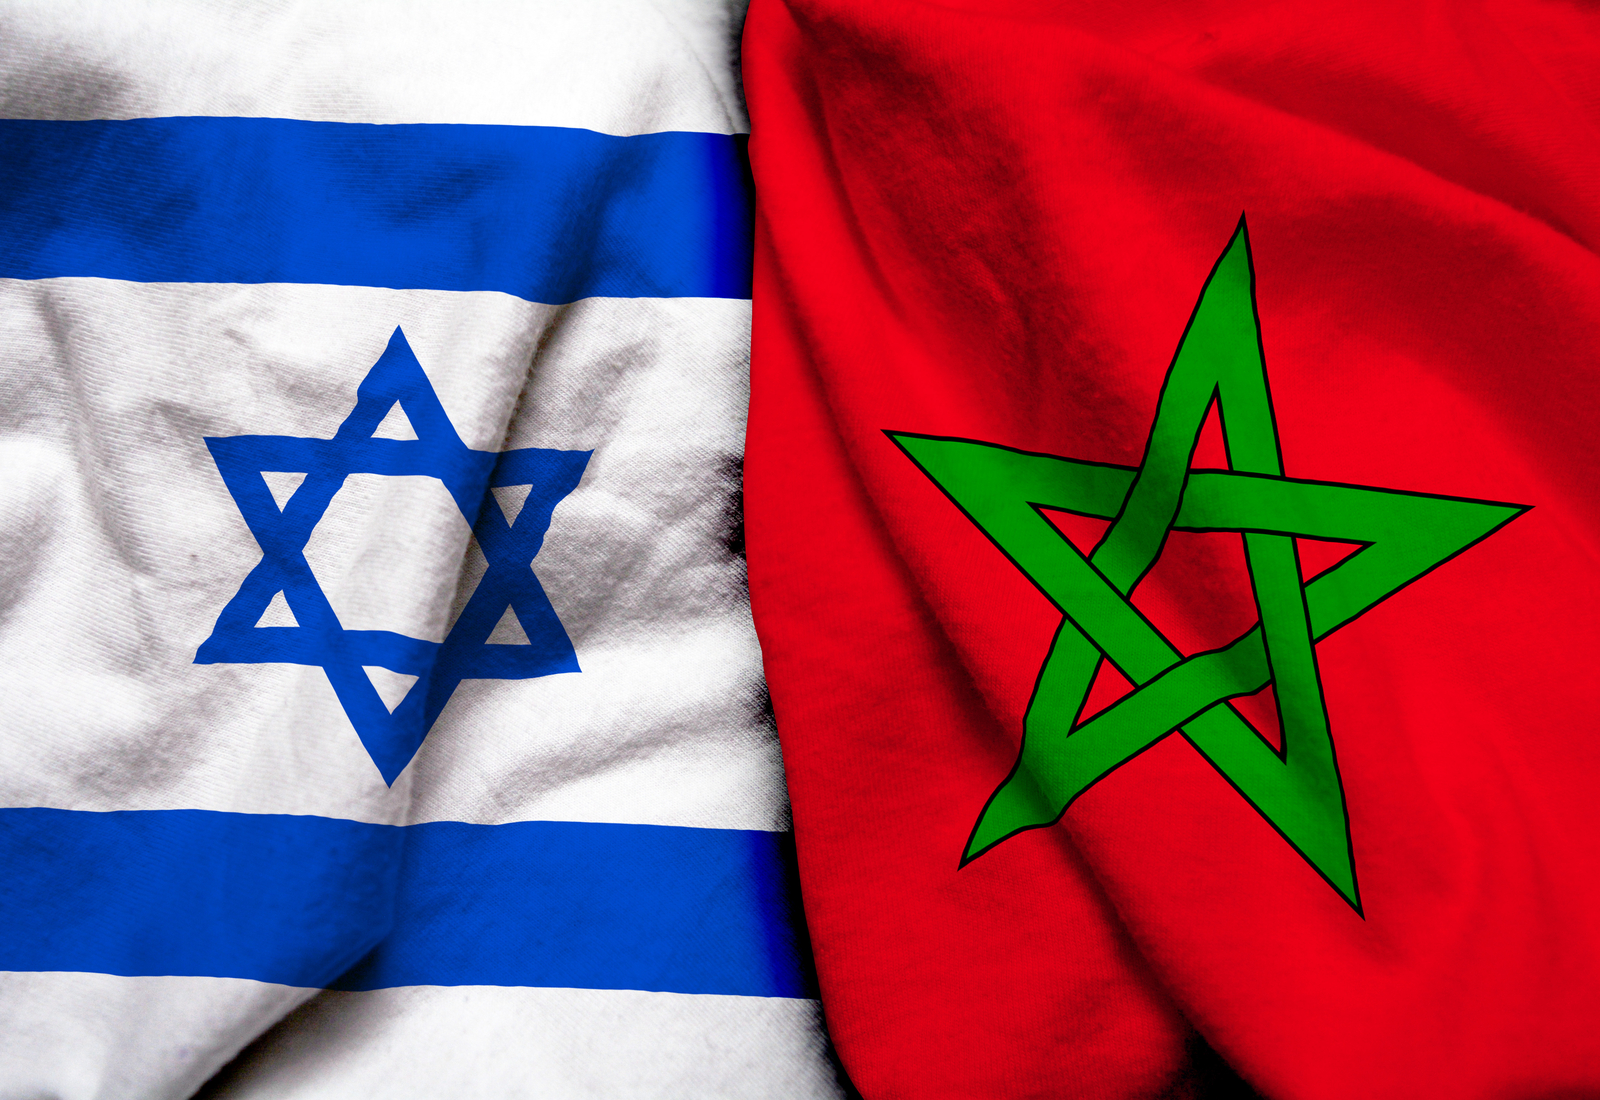 Illustration of the Israeli and Moroccan flags by Shutterstock